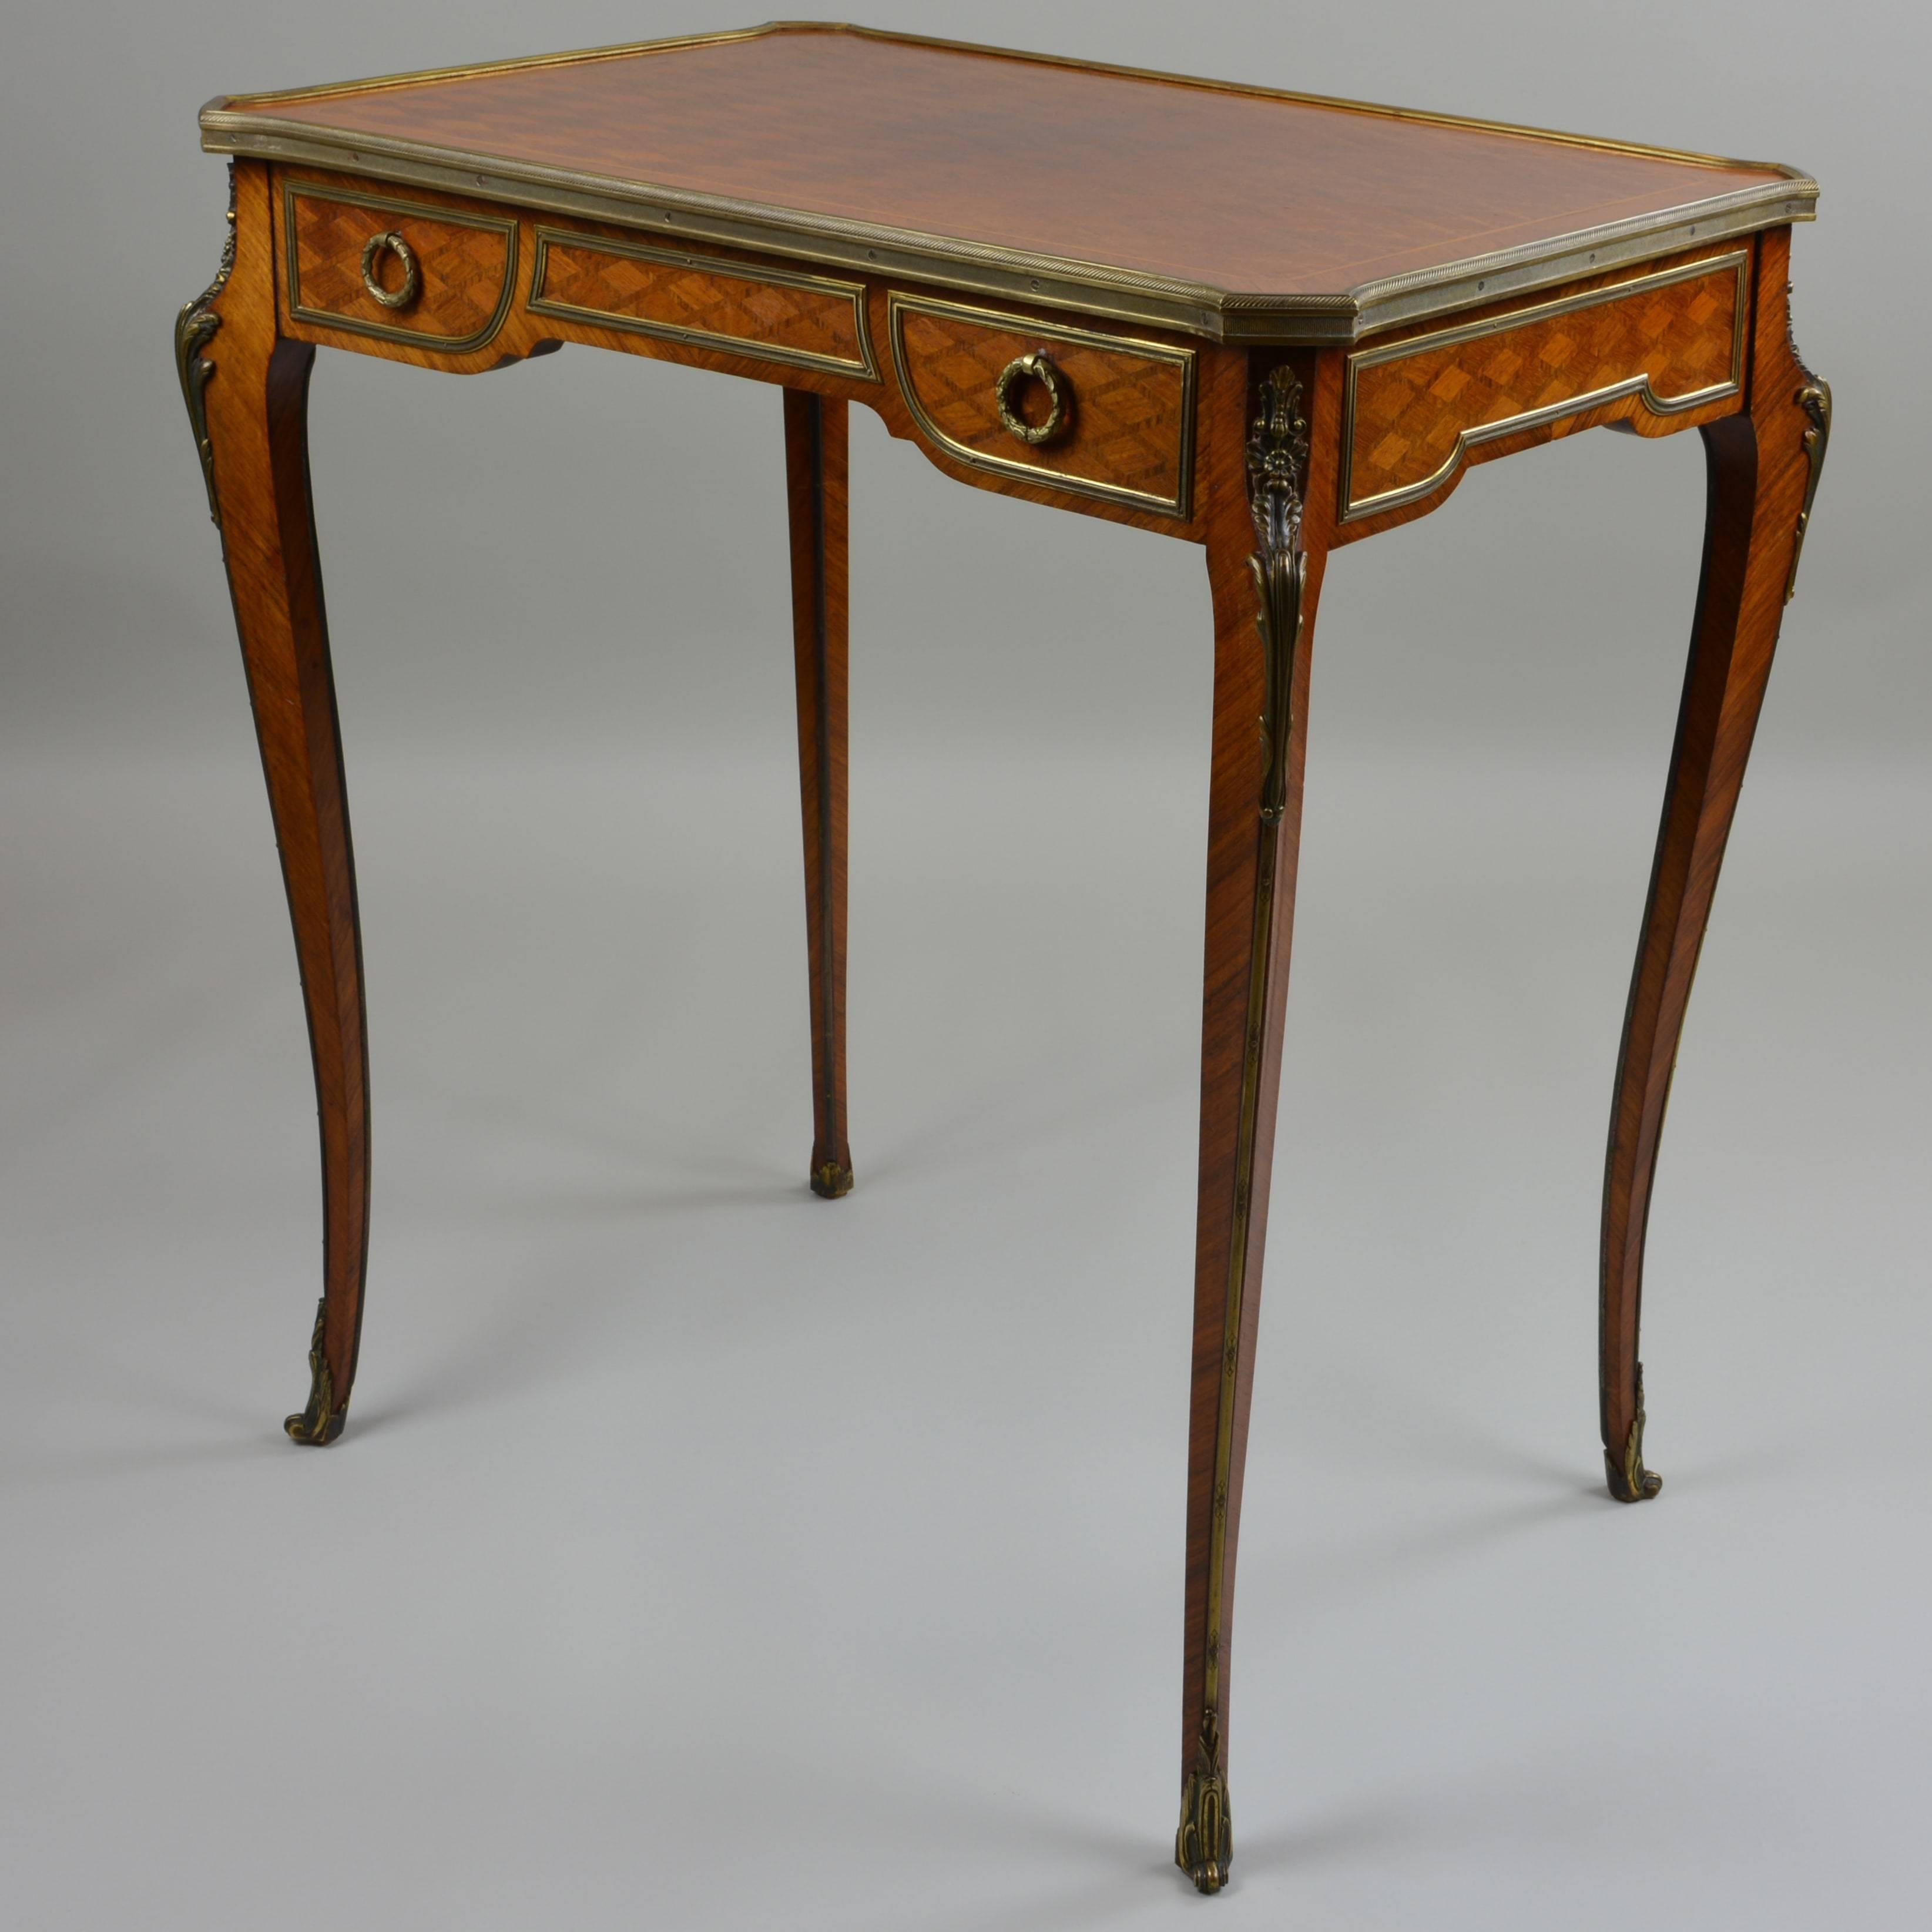 Tucking this small table away would be an injustice to the craftsmanship it quietly conveys. Beautifully joined wood veneers, understated diamond marquetry, and finely detailed brass ornamentation give this mid-19th century side table its enduring